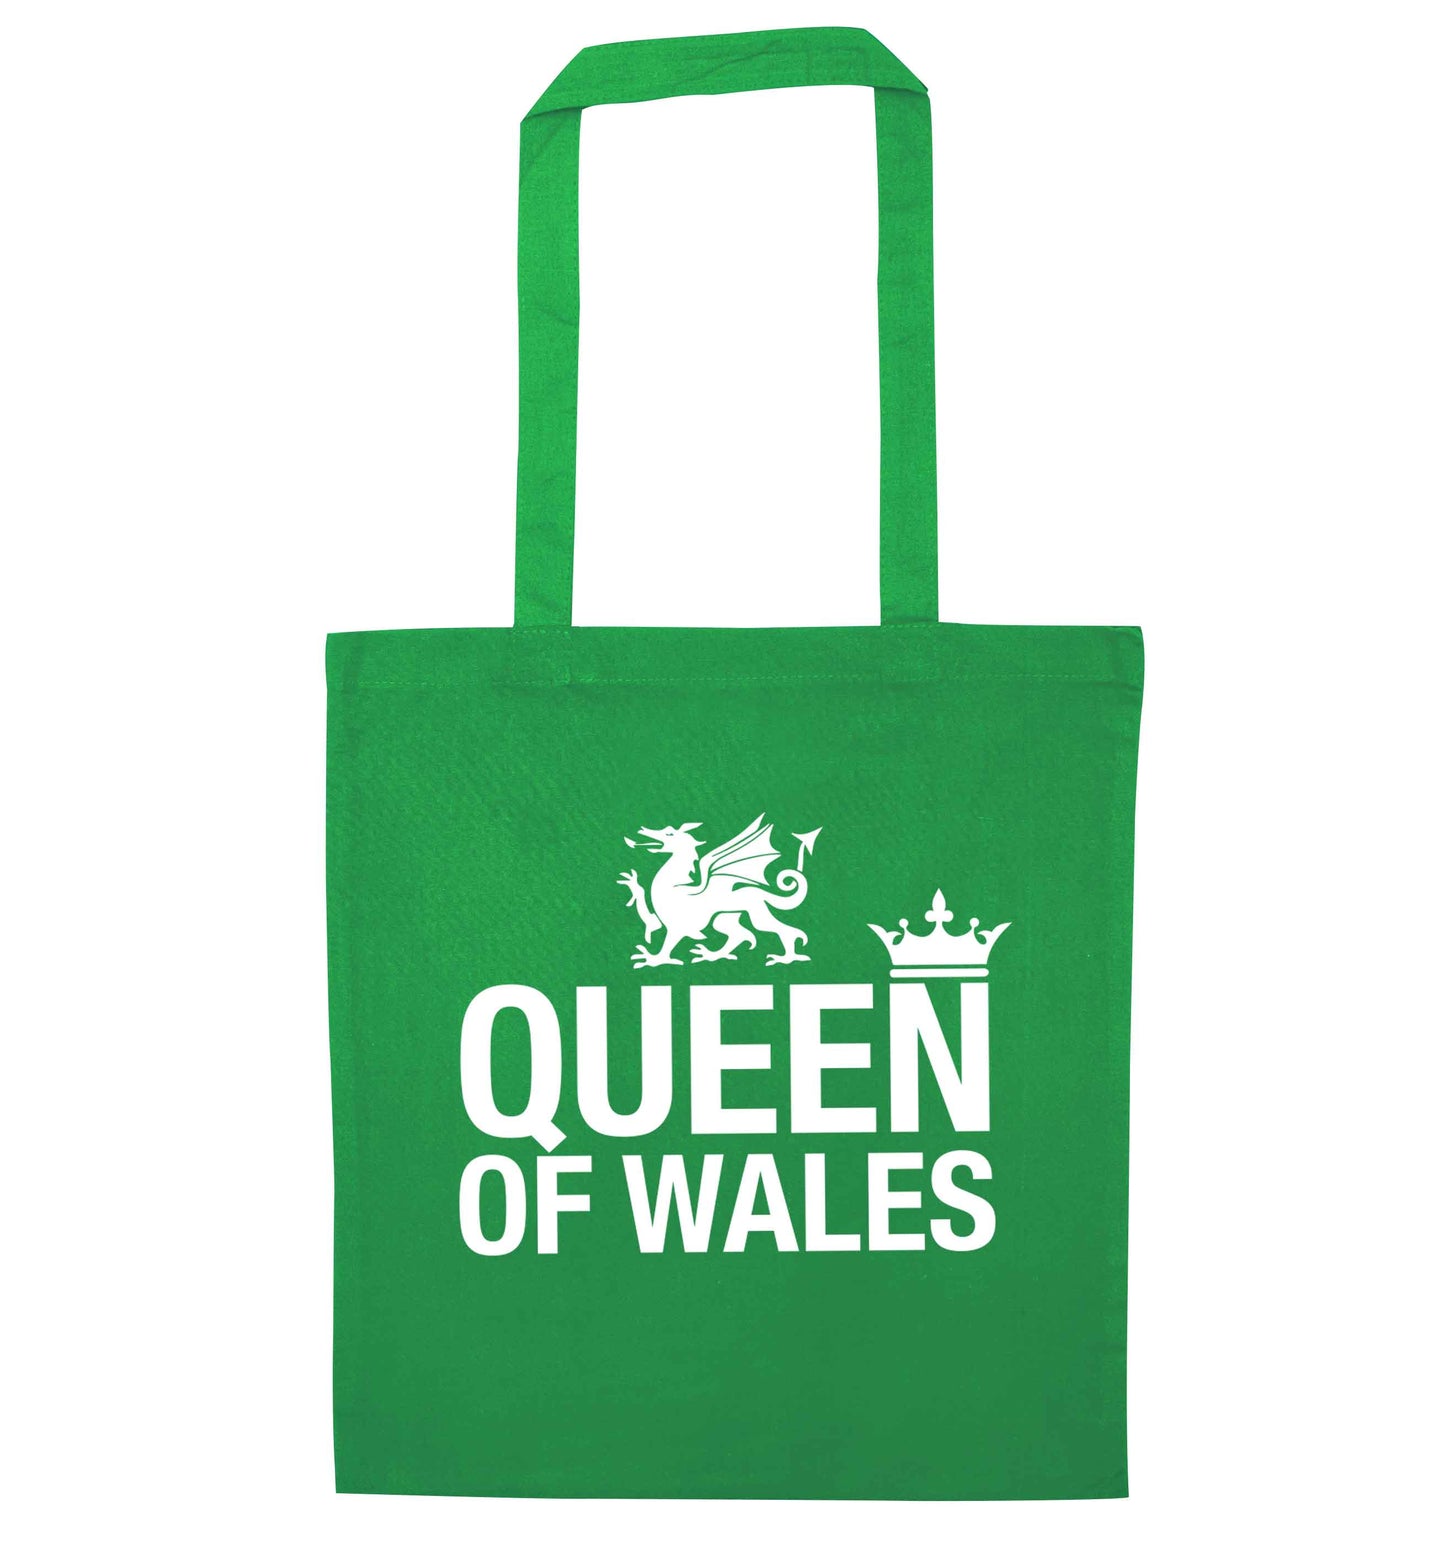 Queen of Wales green tote bag